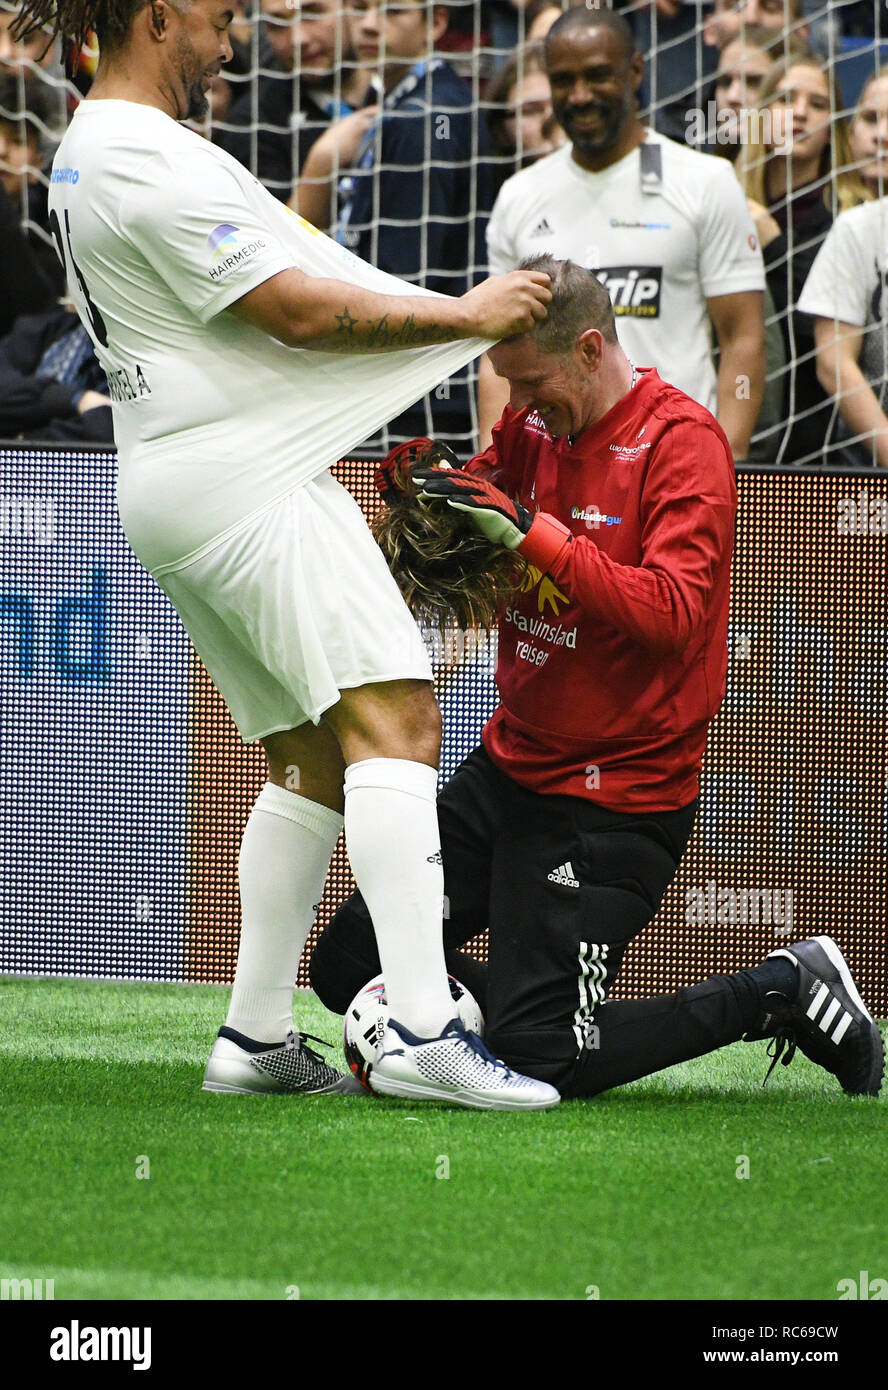 Gummersbach, Germany. 13th Jan, 2019. Schauinsland Reisen Cup: The singer Mickie  Krause puts on his wig under the jersey of Patrick Owomoyela at the  celebrity game of the indoor soccer tournament. Credit: